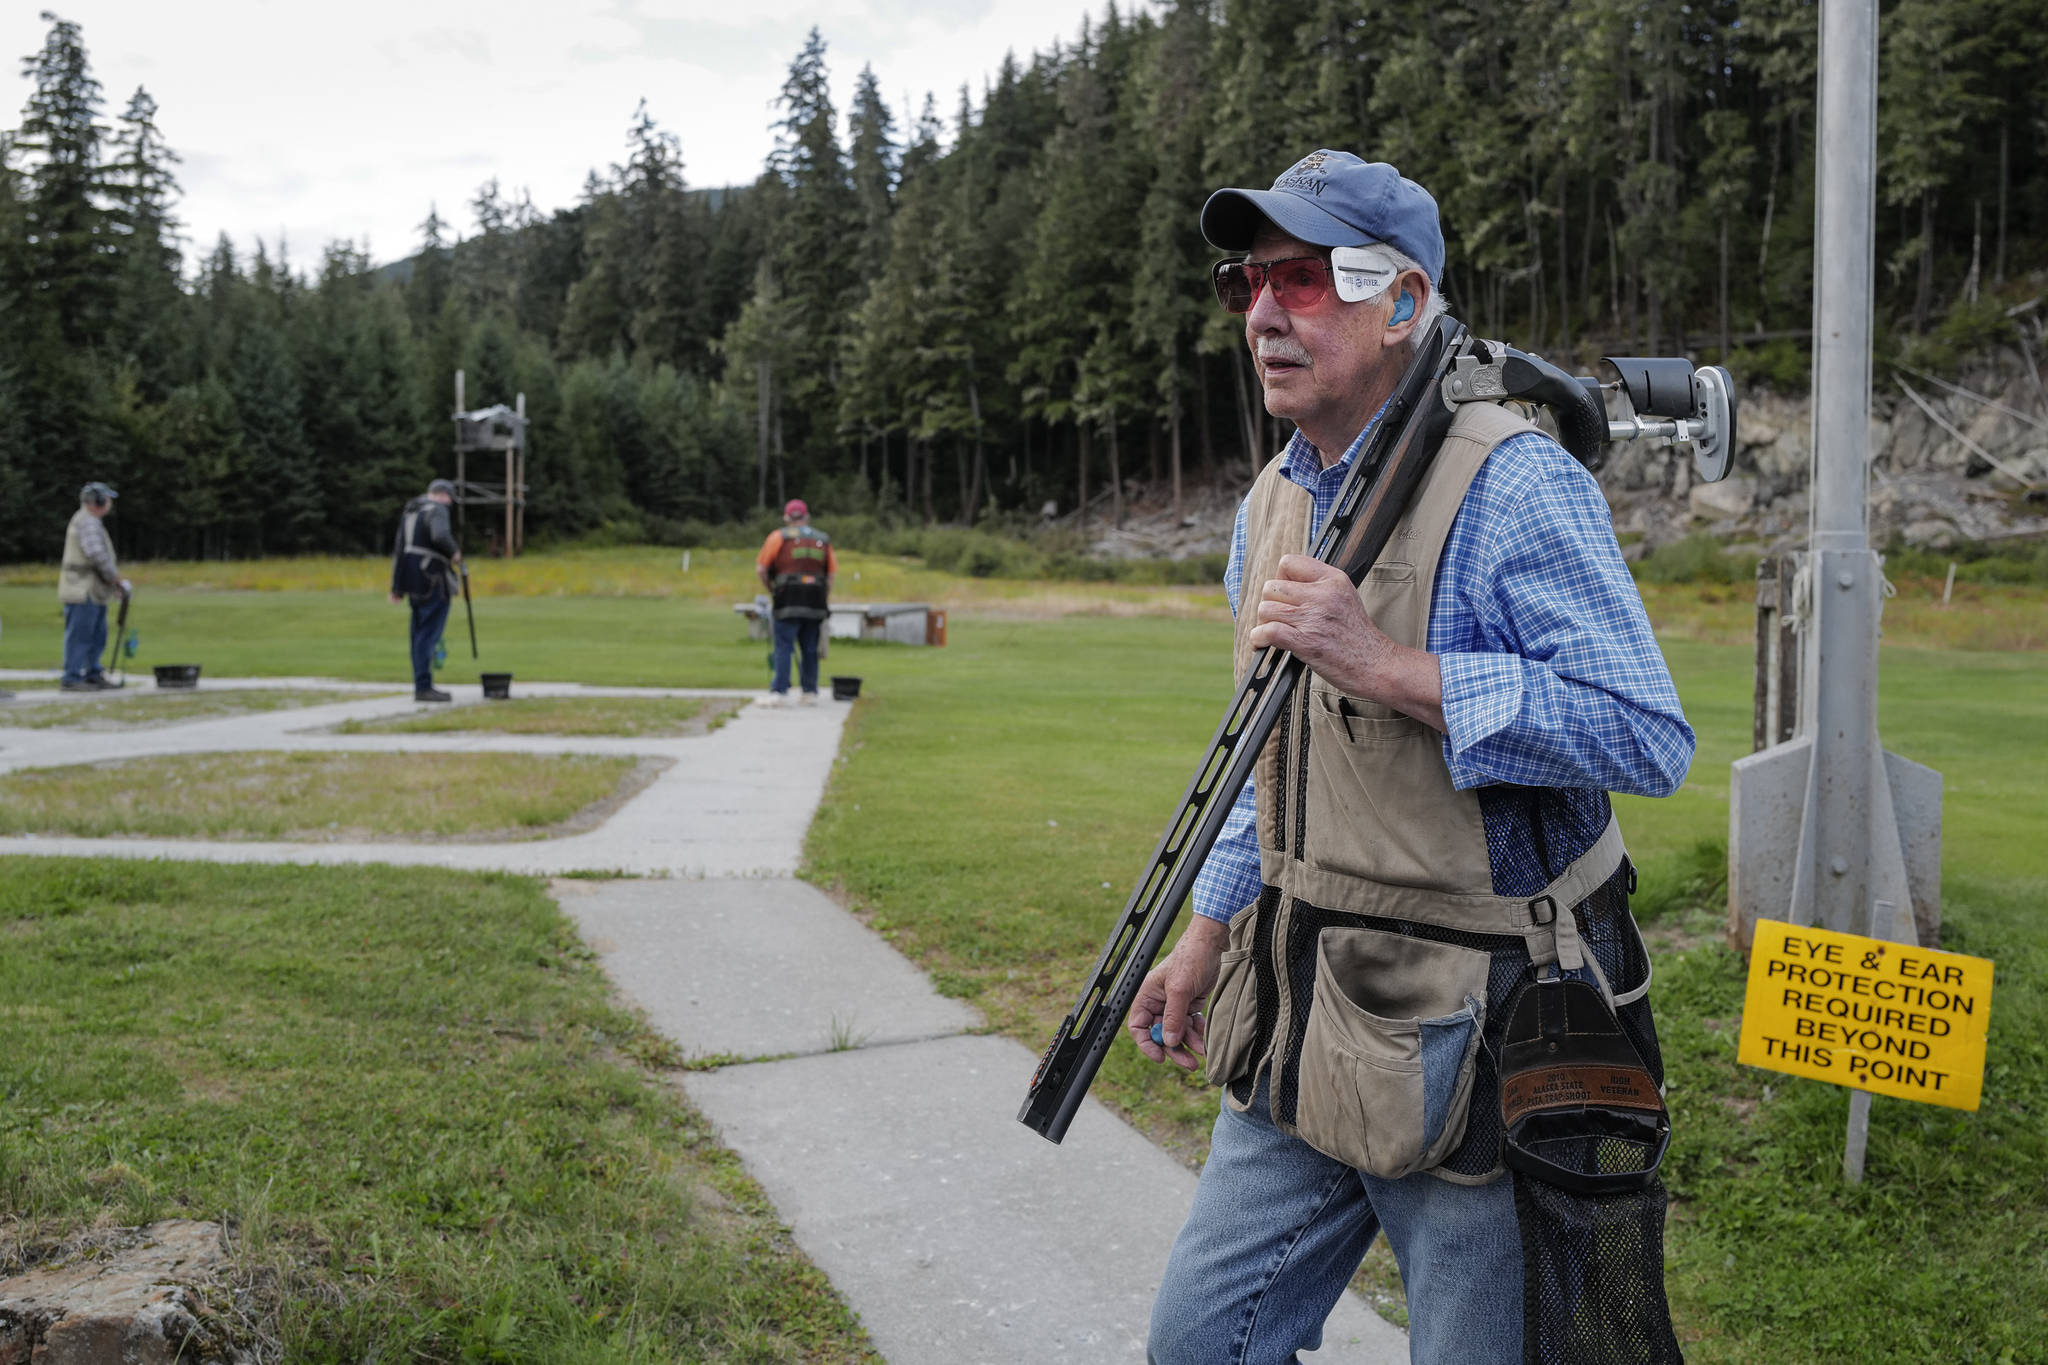 Shootin’ sharp: 80-year-old trap shooter from Juneau wins gold medal